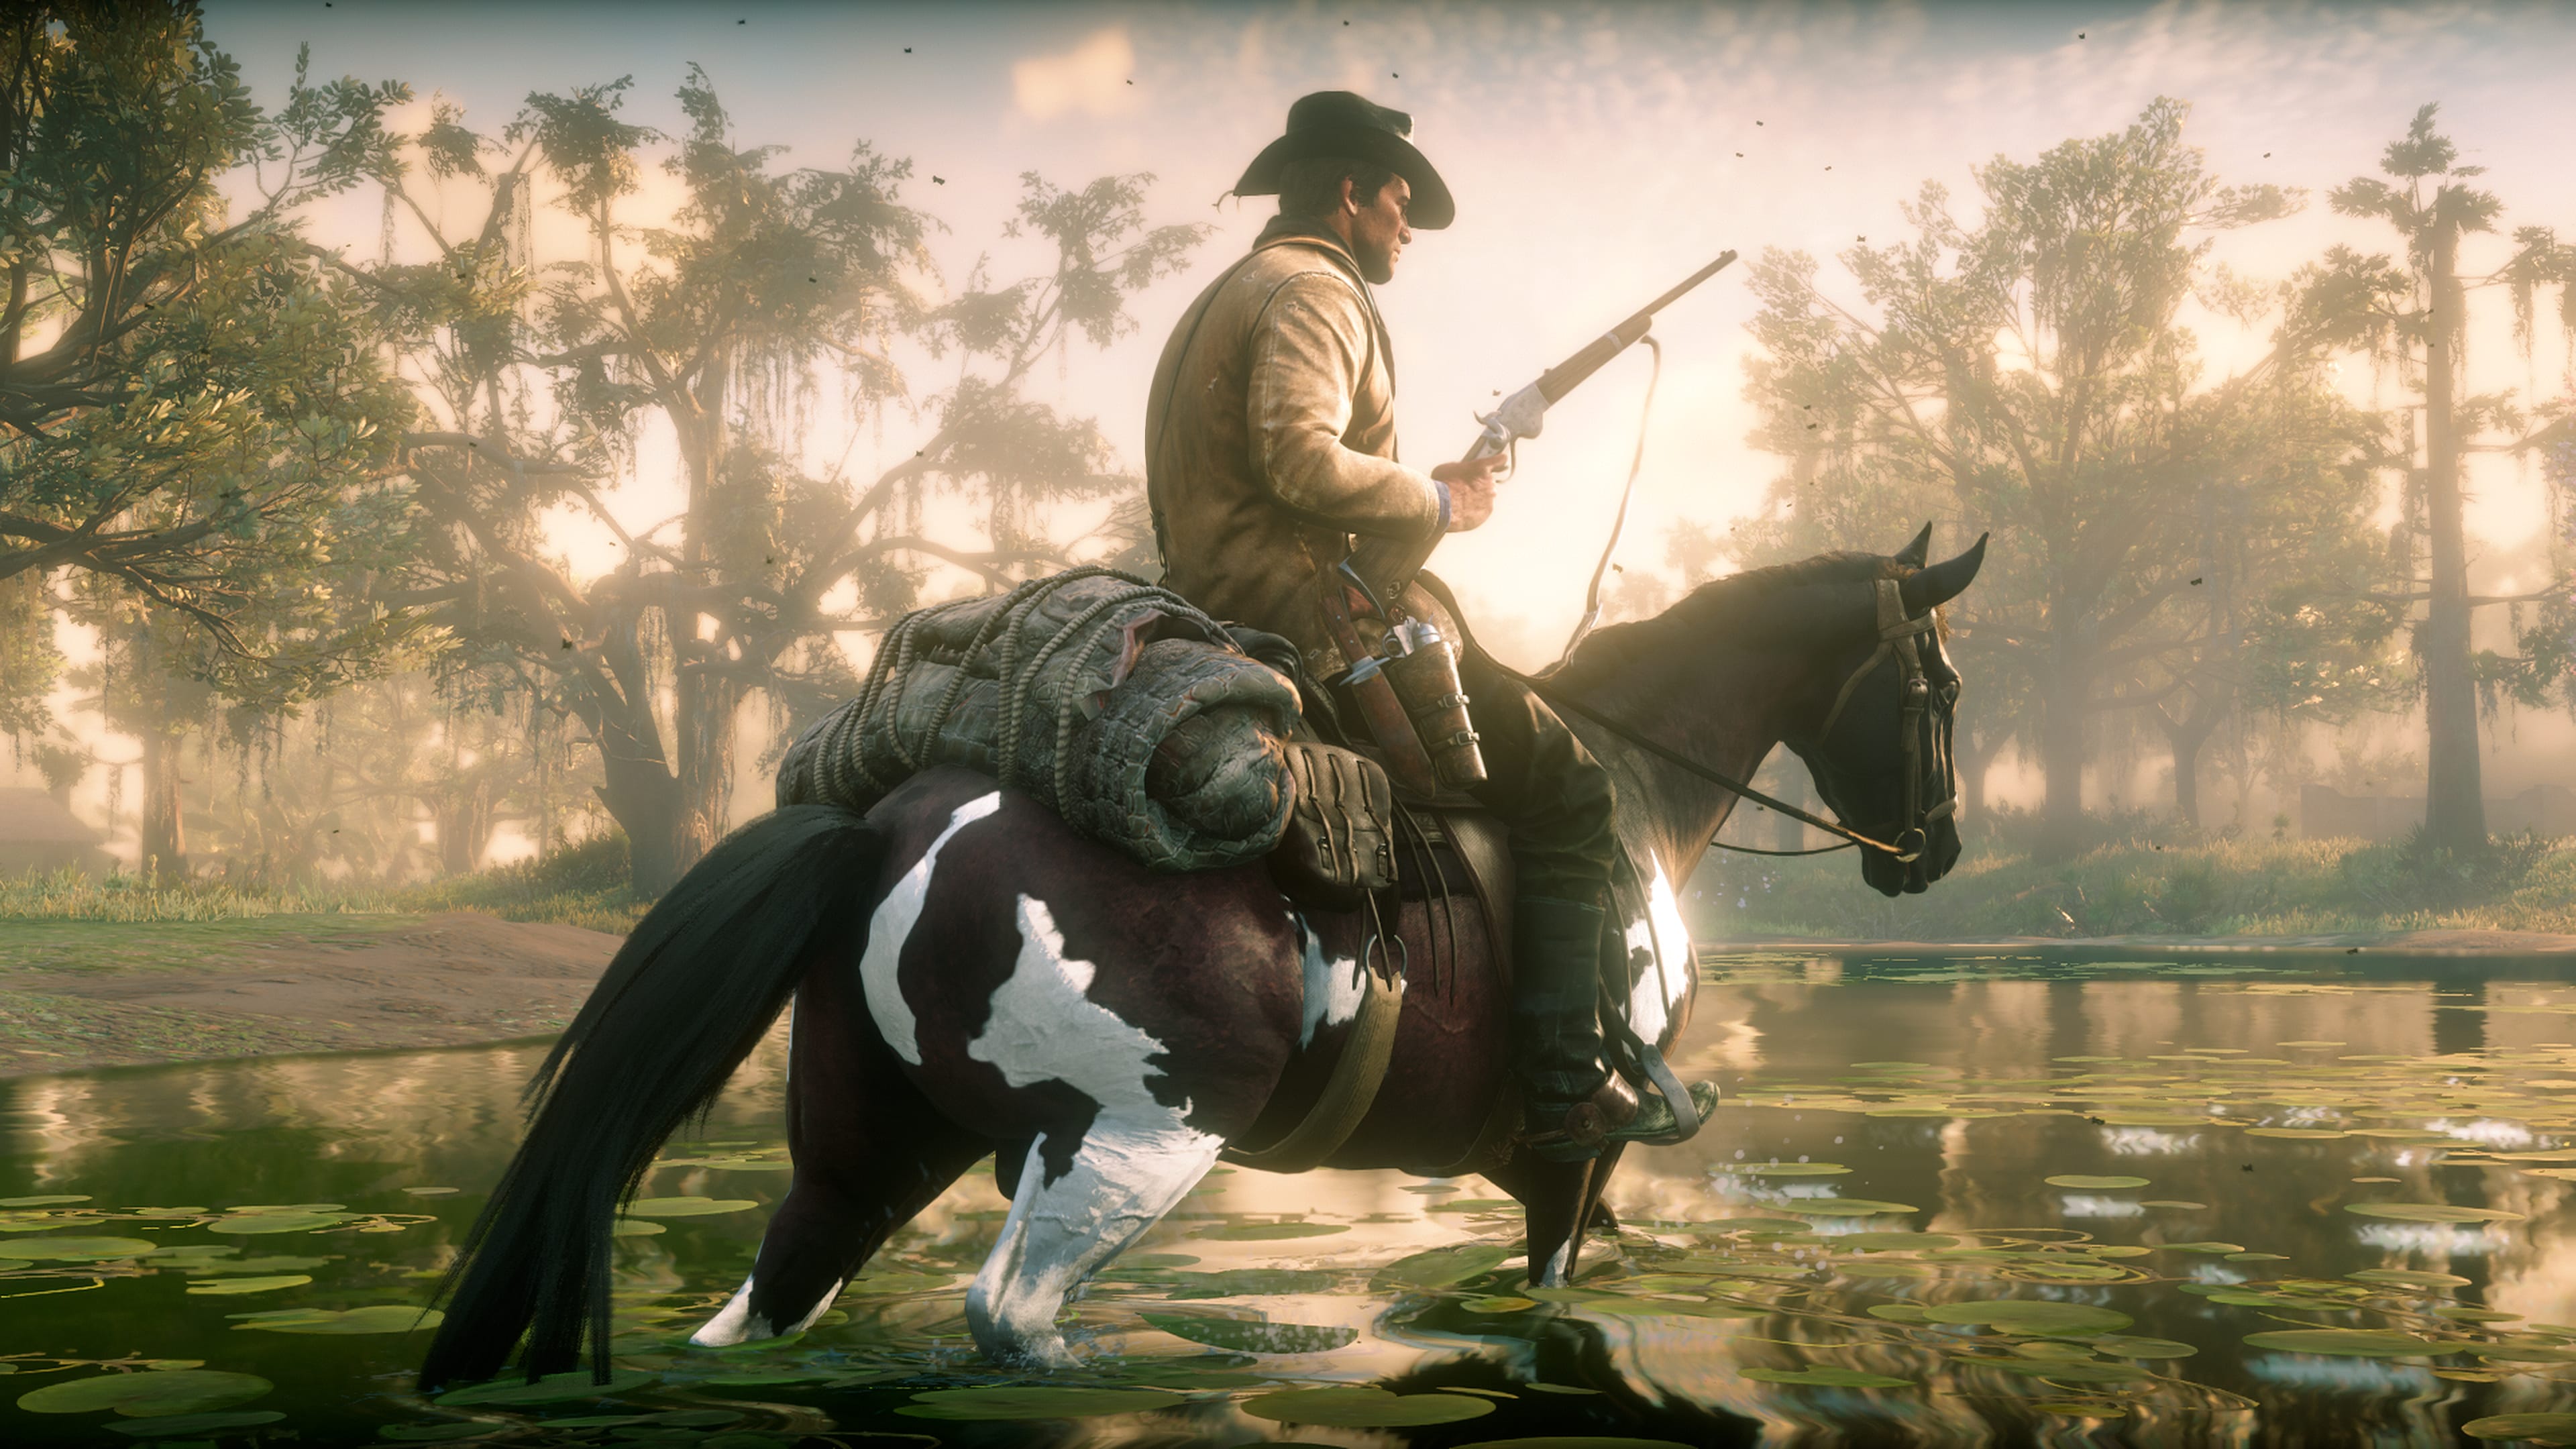 Red Dead Redemption 2 size, Red Dead Online players, and more RDR2 details |